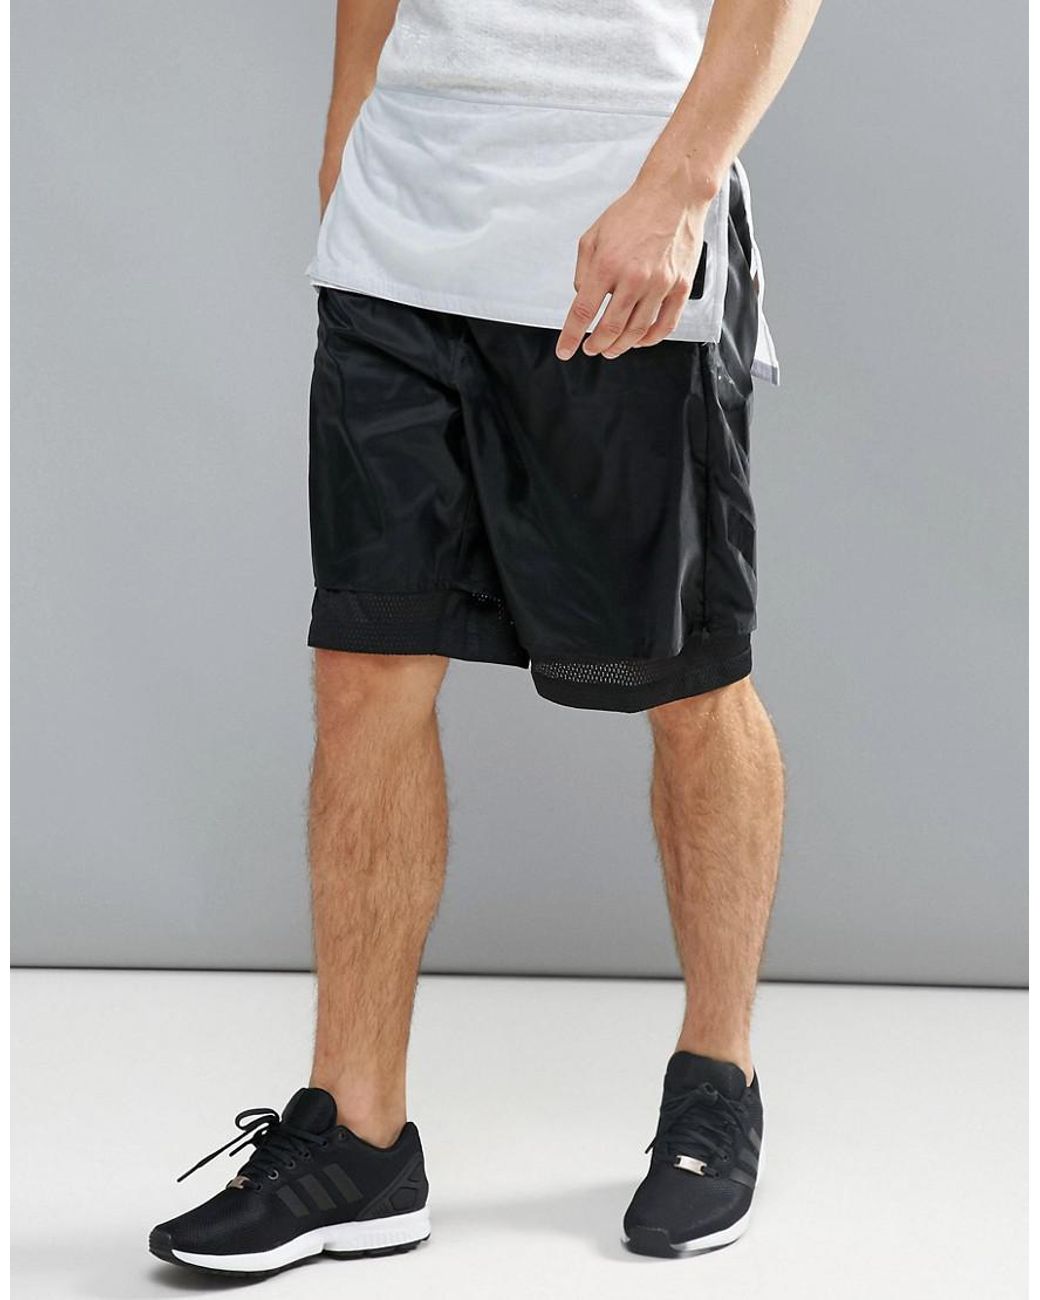 adidas Adidas Double Layer Basketball Shorts in Black for Men